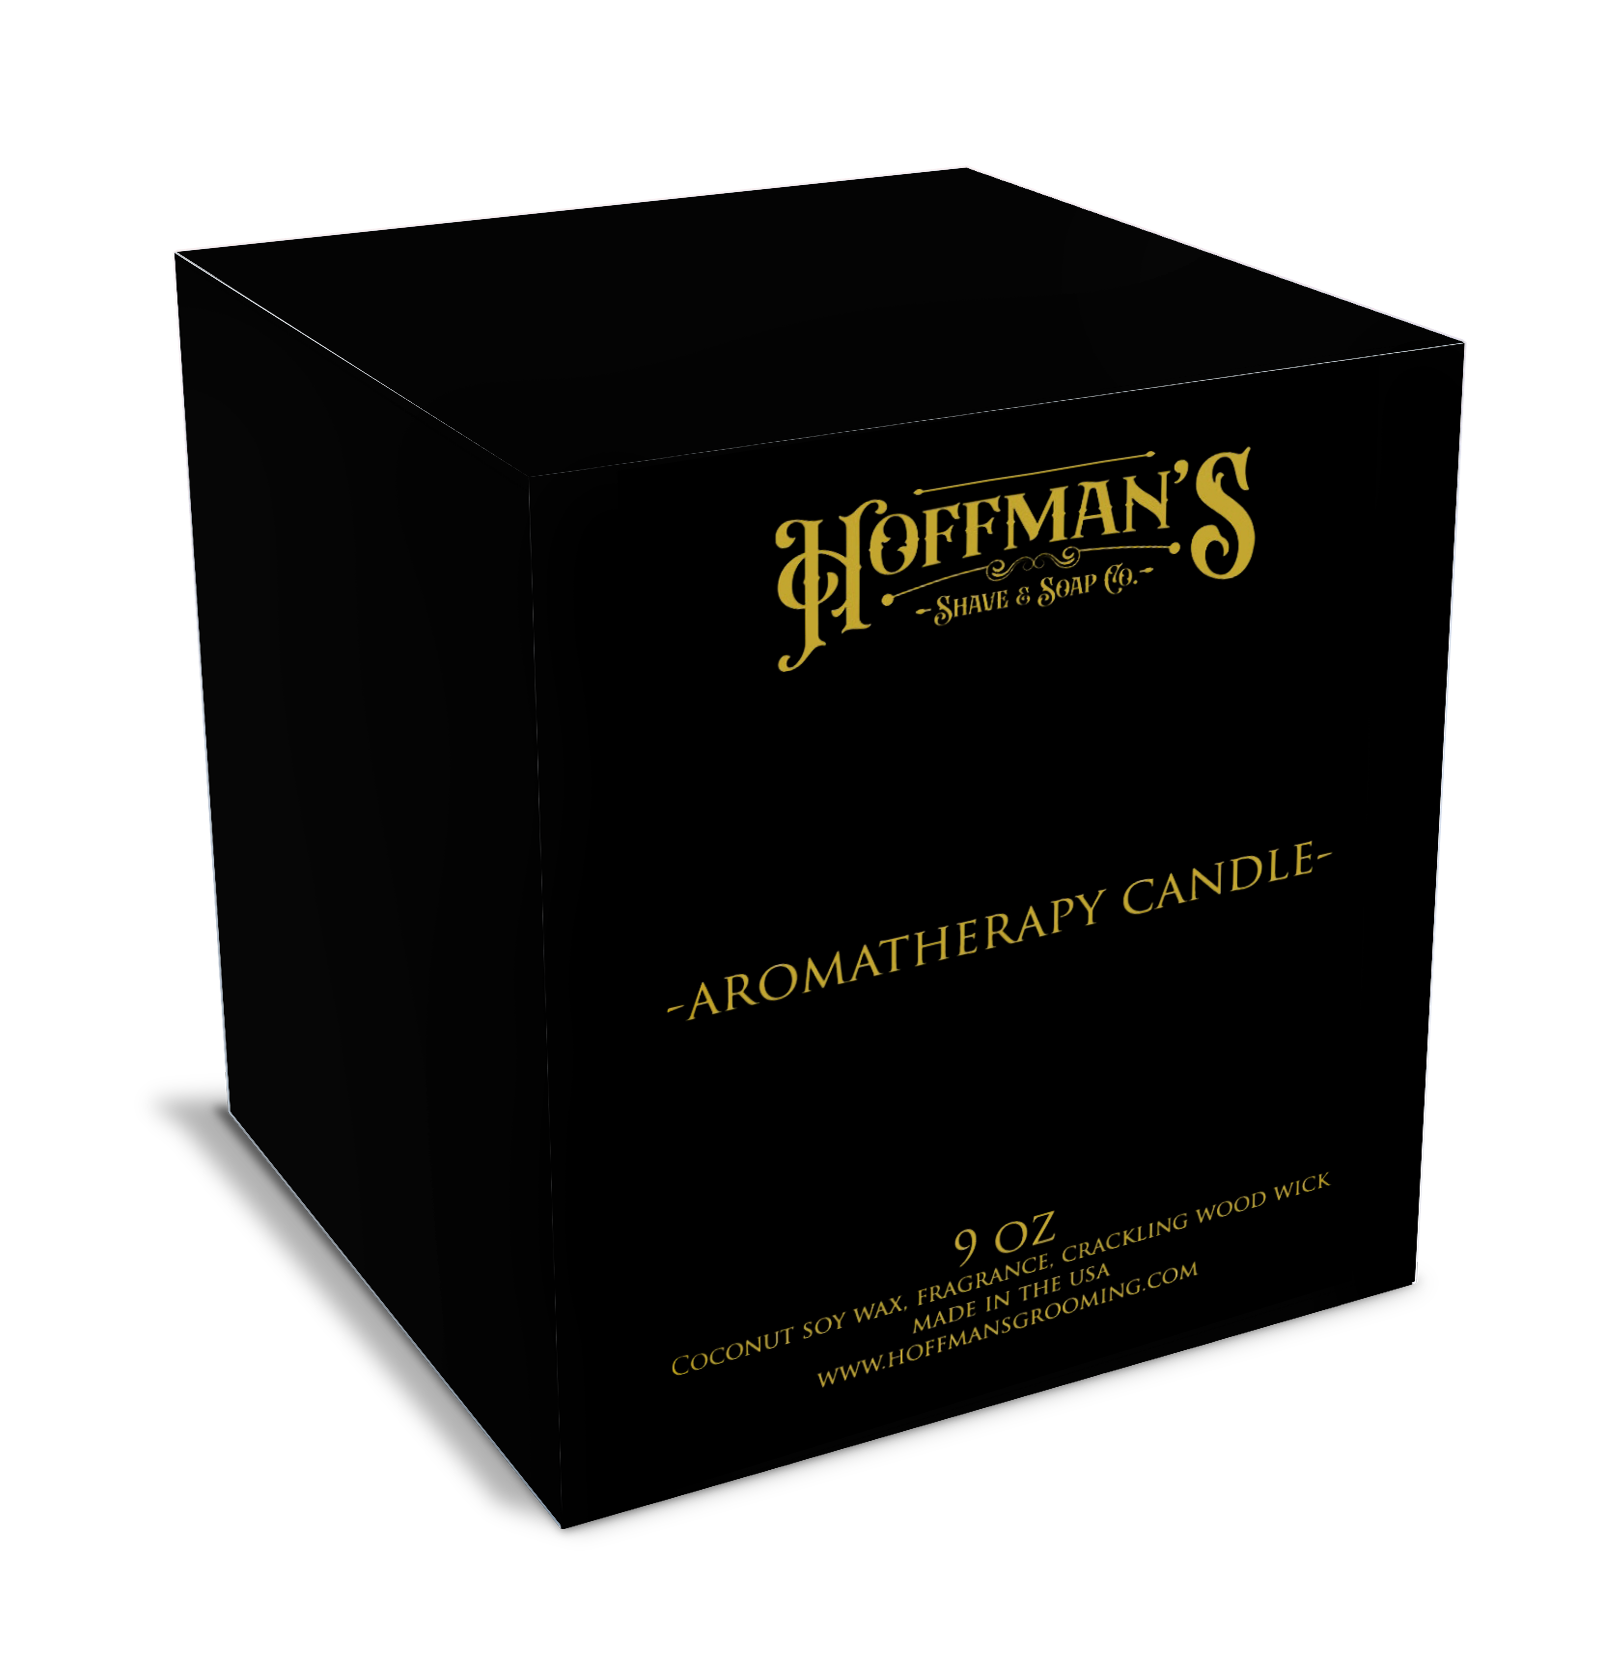 The Great Reset 9oz Aromatherapy Candle Box